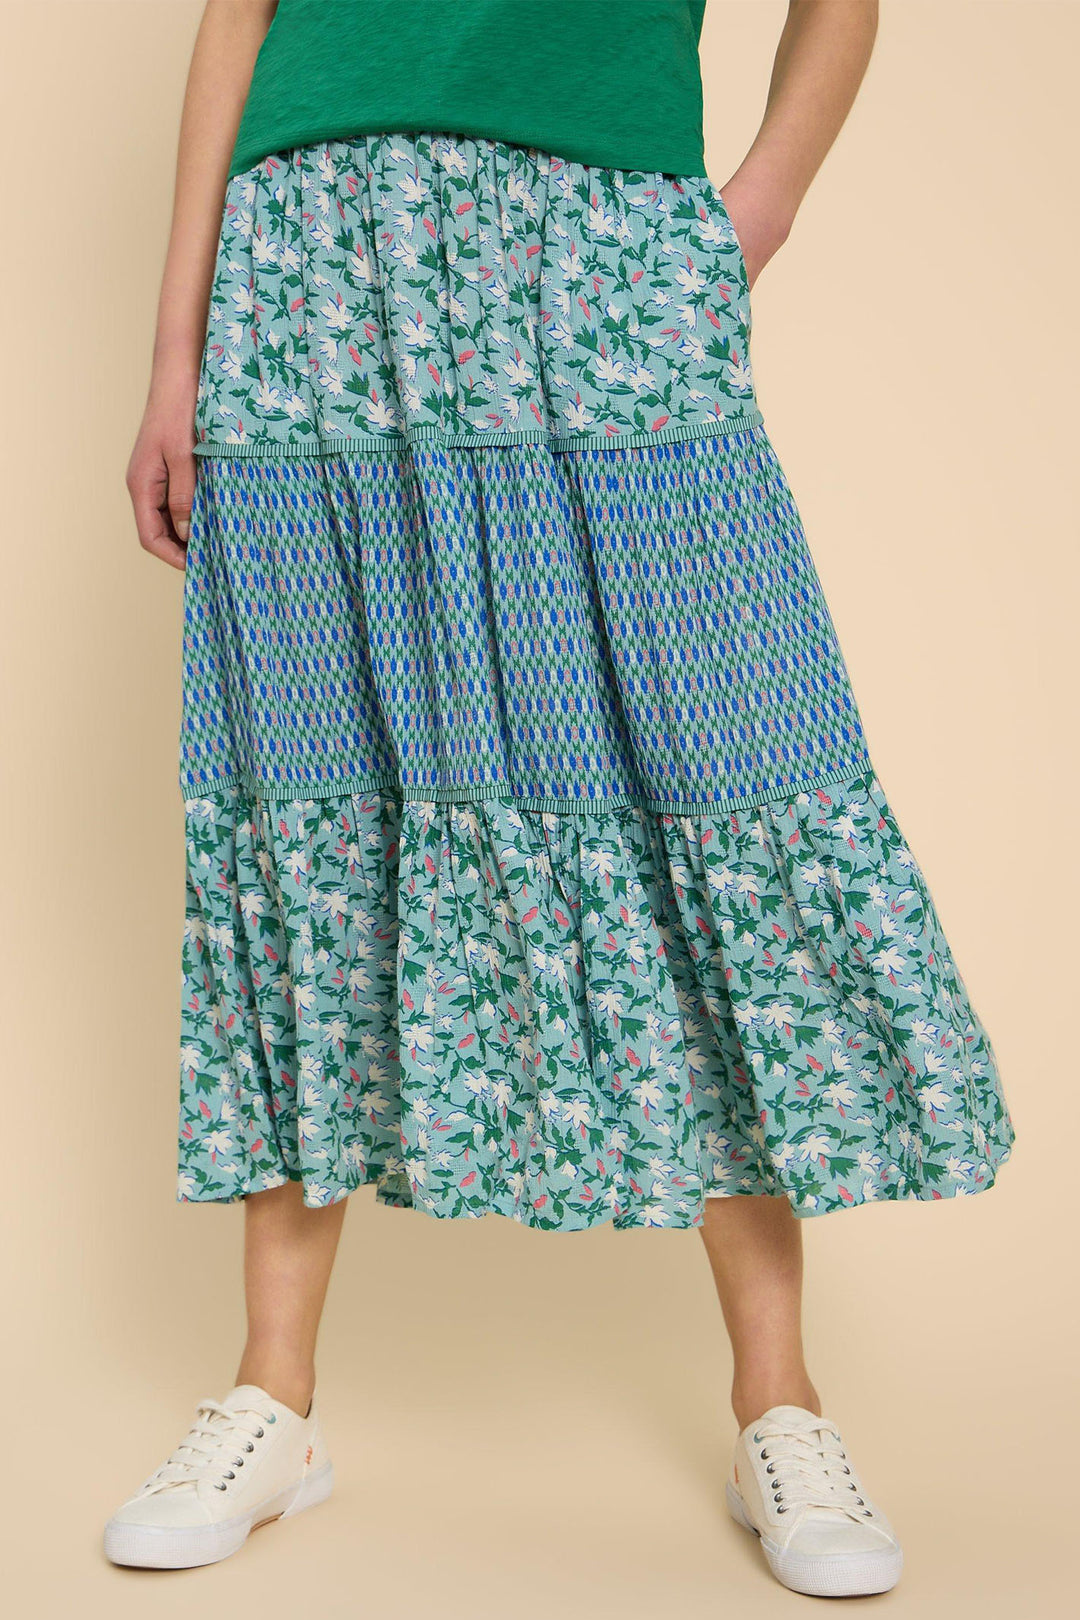 White Stuff 441004 Mabel Teal Green Mixed Print Skirt - Shirley Allum Boutique